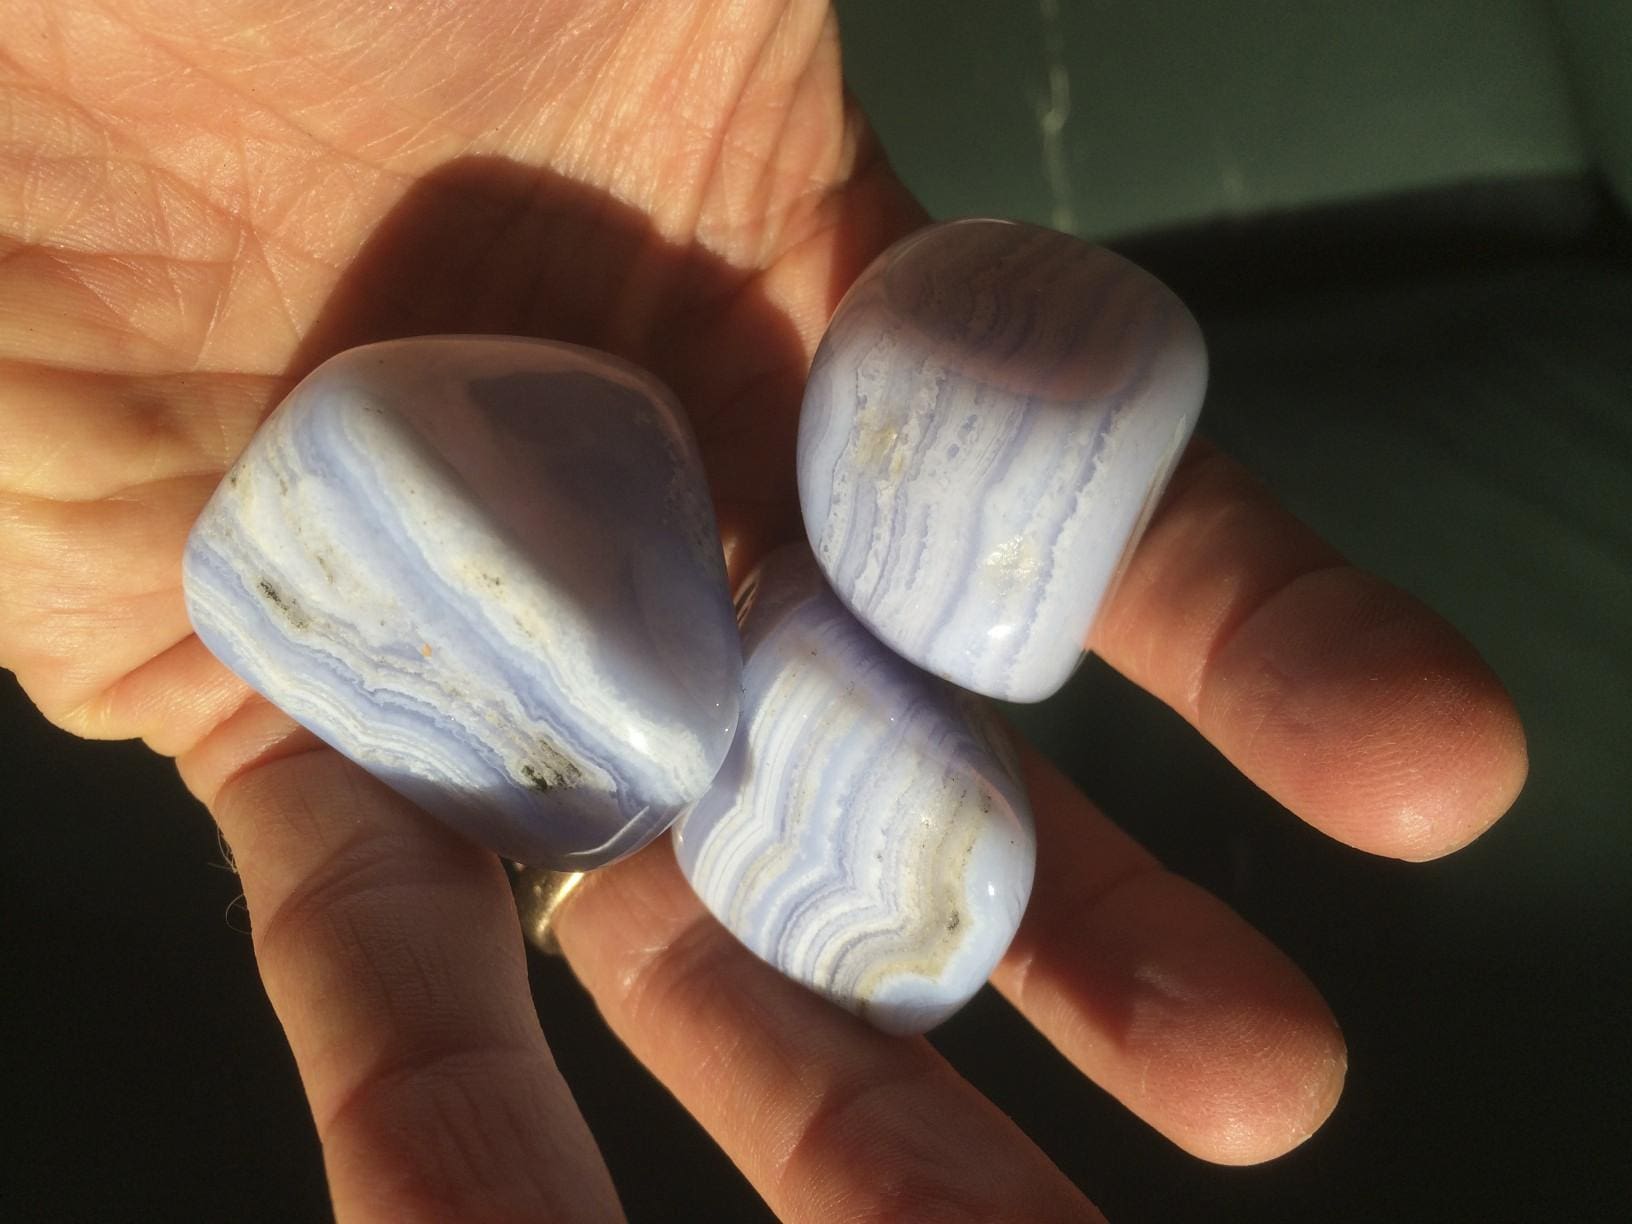 Blue Lace Agates - soothing but weighty - and gently colored, as should be our self talk and assertions to the world.